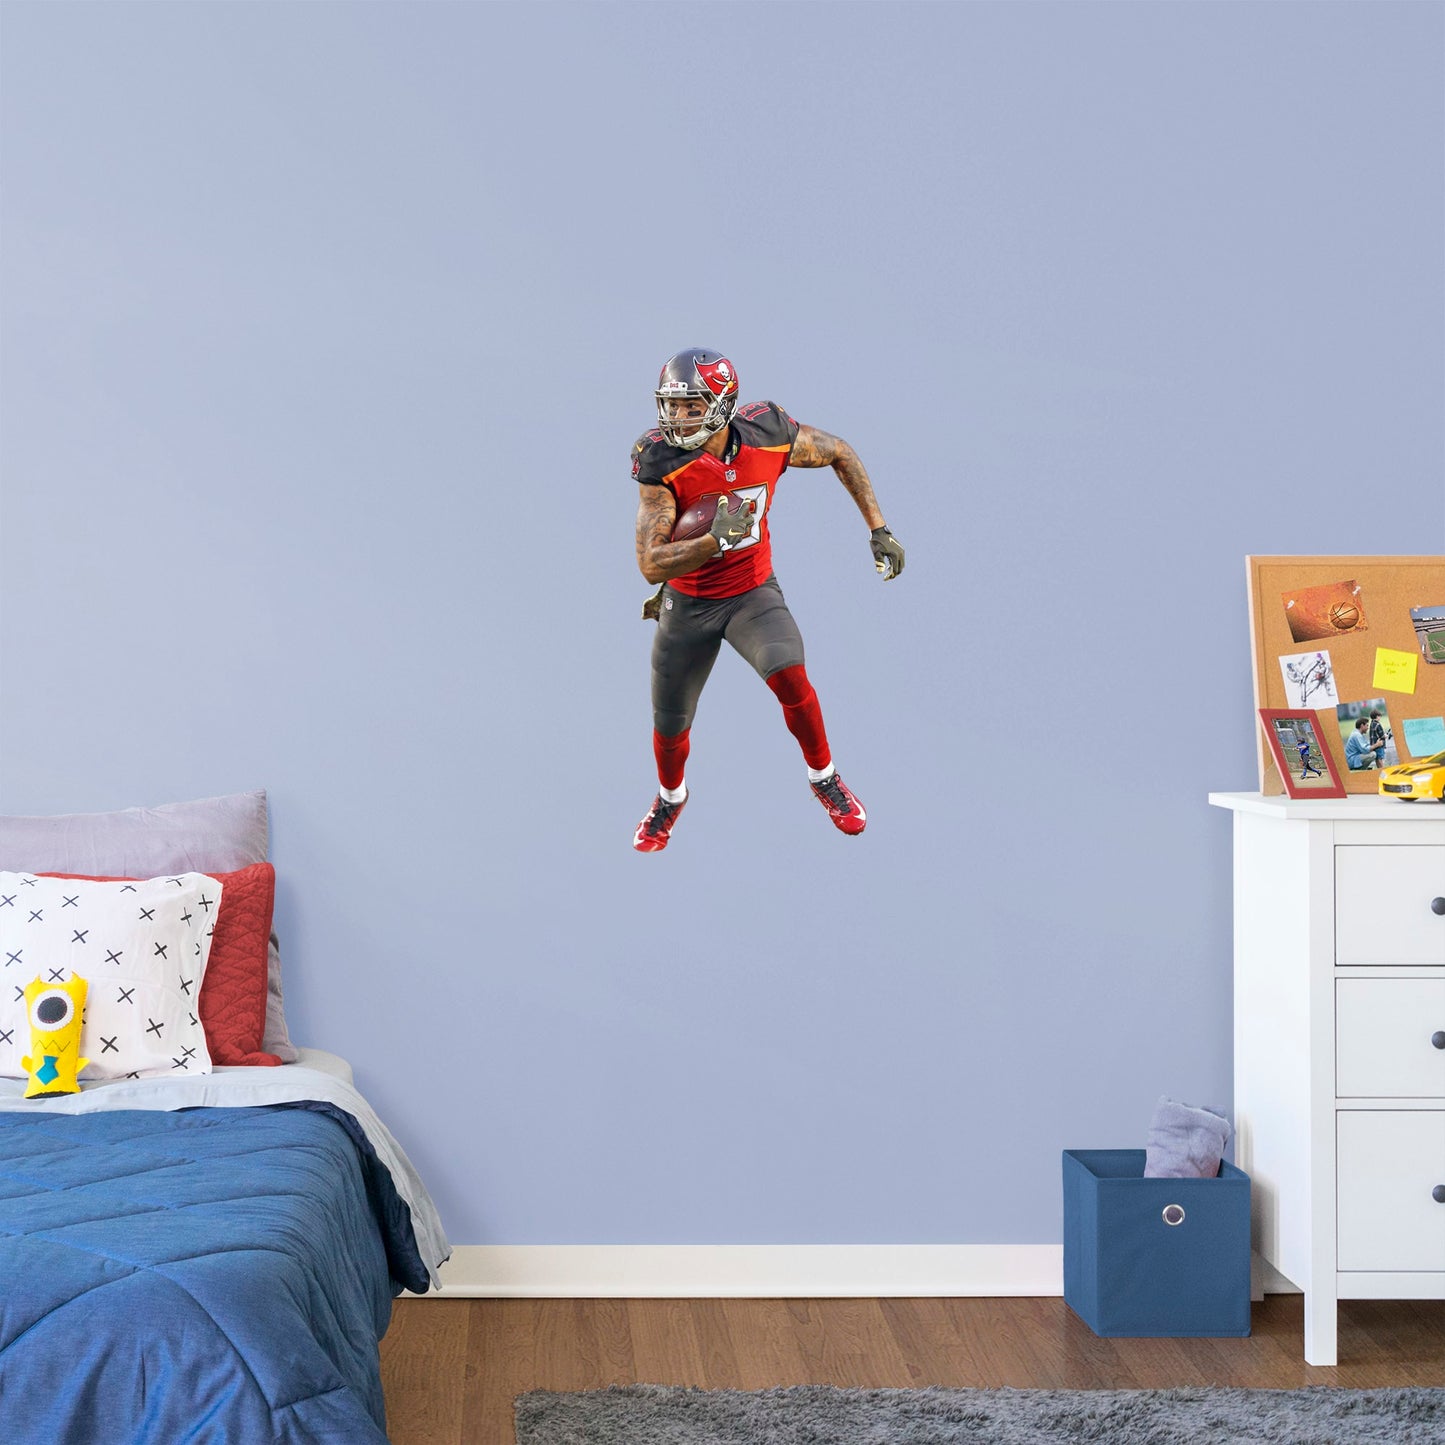 Giant Athlete + 2 Decals (28"W x 51"H) Bring the action of the NFL into your home with a wall decal of Mike Evans! High quality, durable, and tear resistant, you'll be able to stick and move it as many times as you want to create the ultimate football experience in any room!